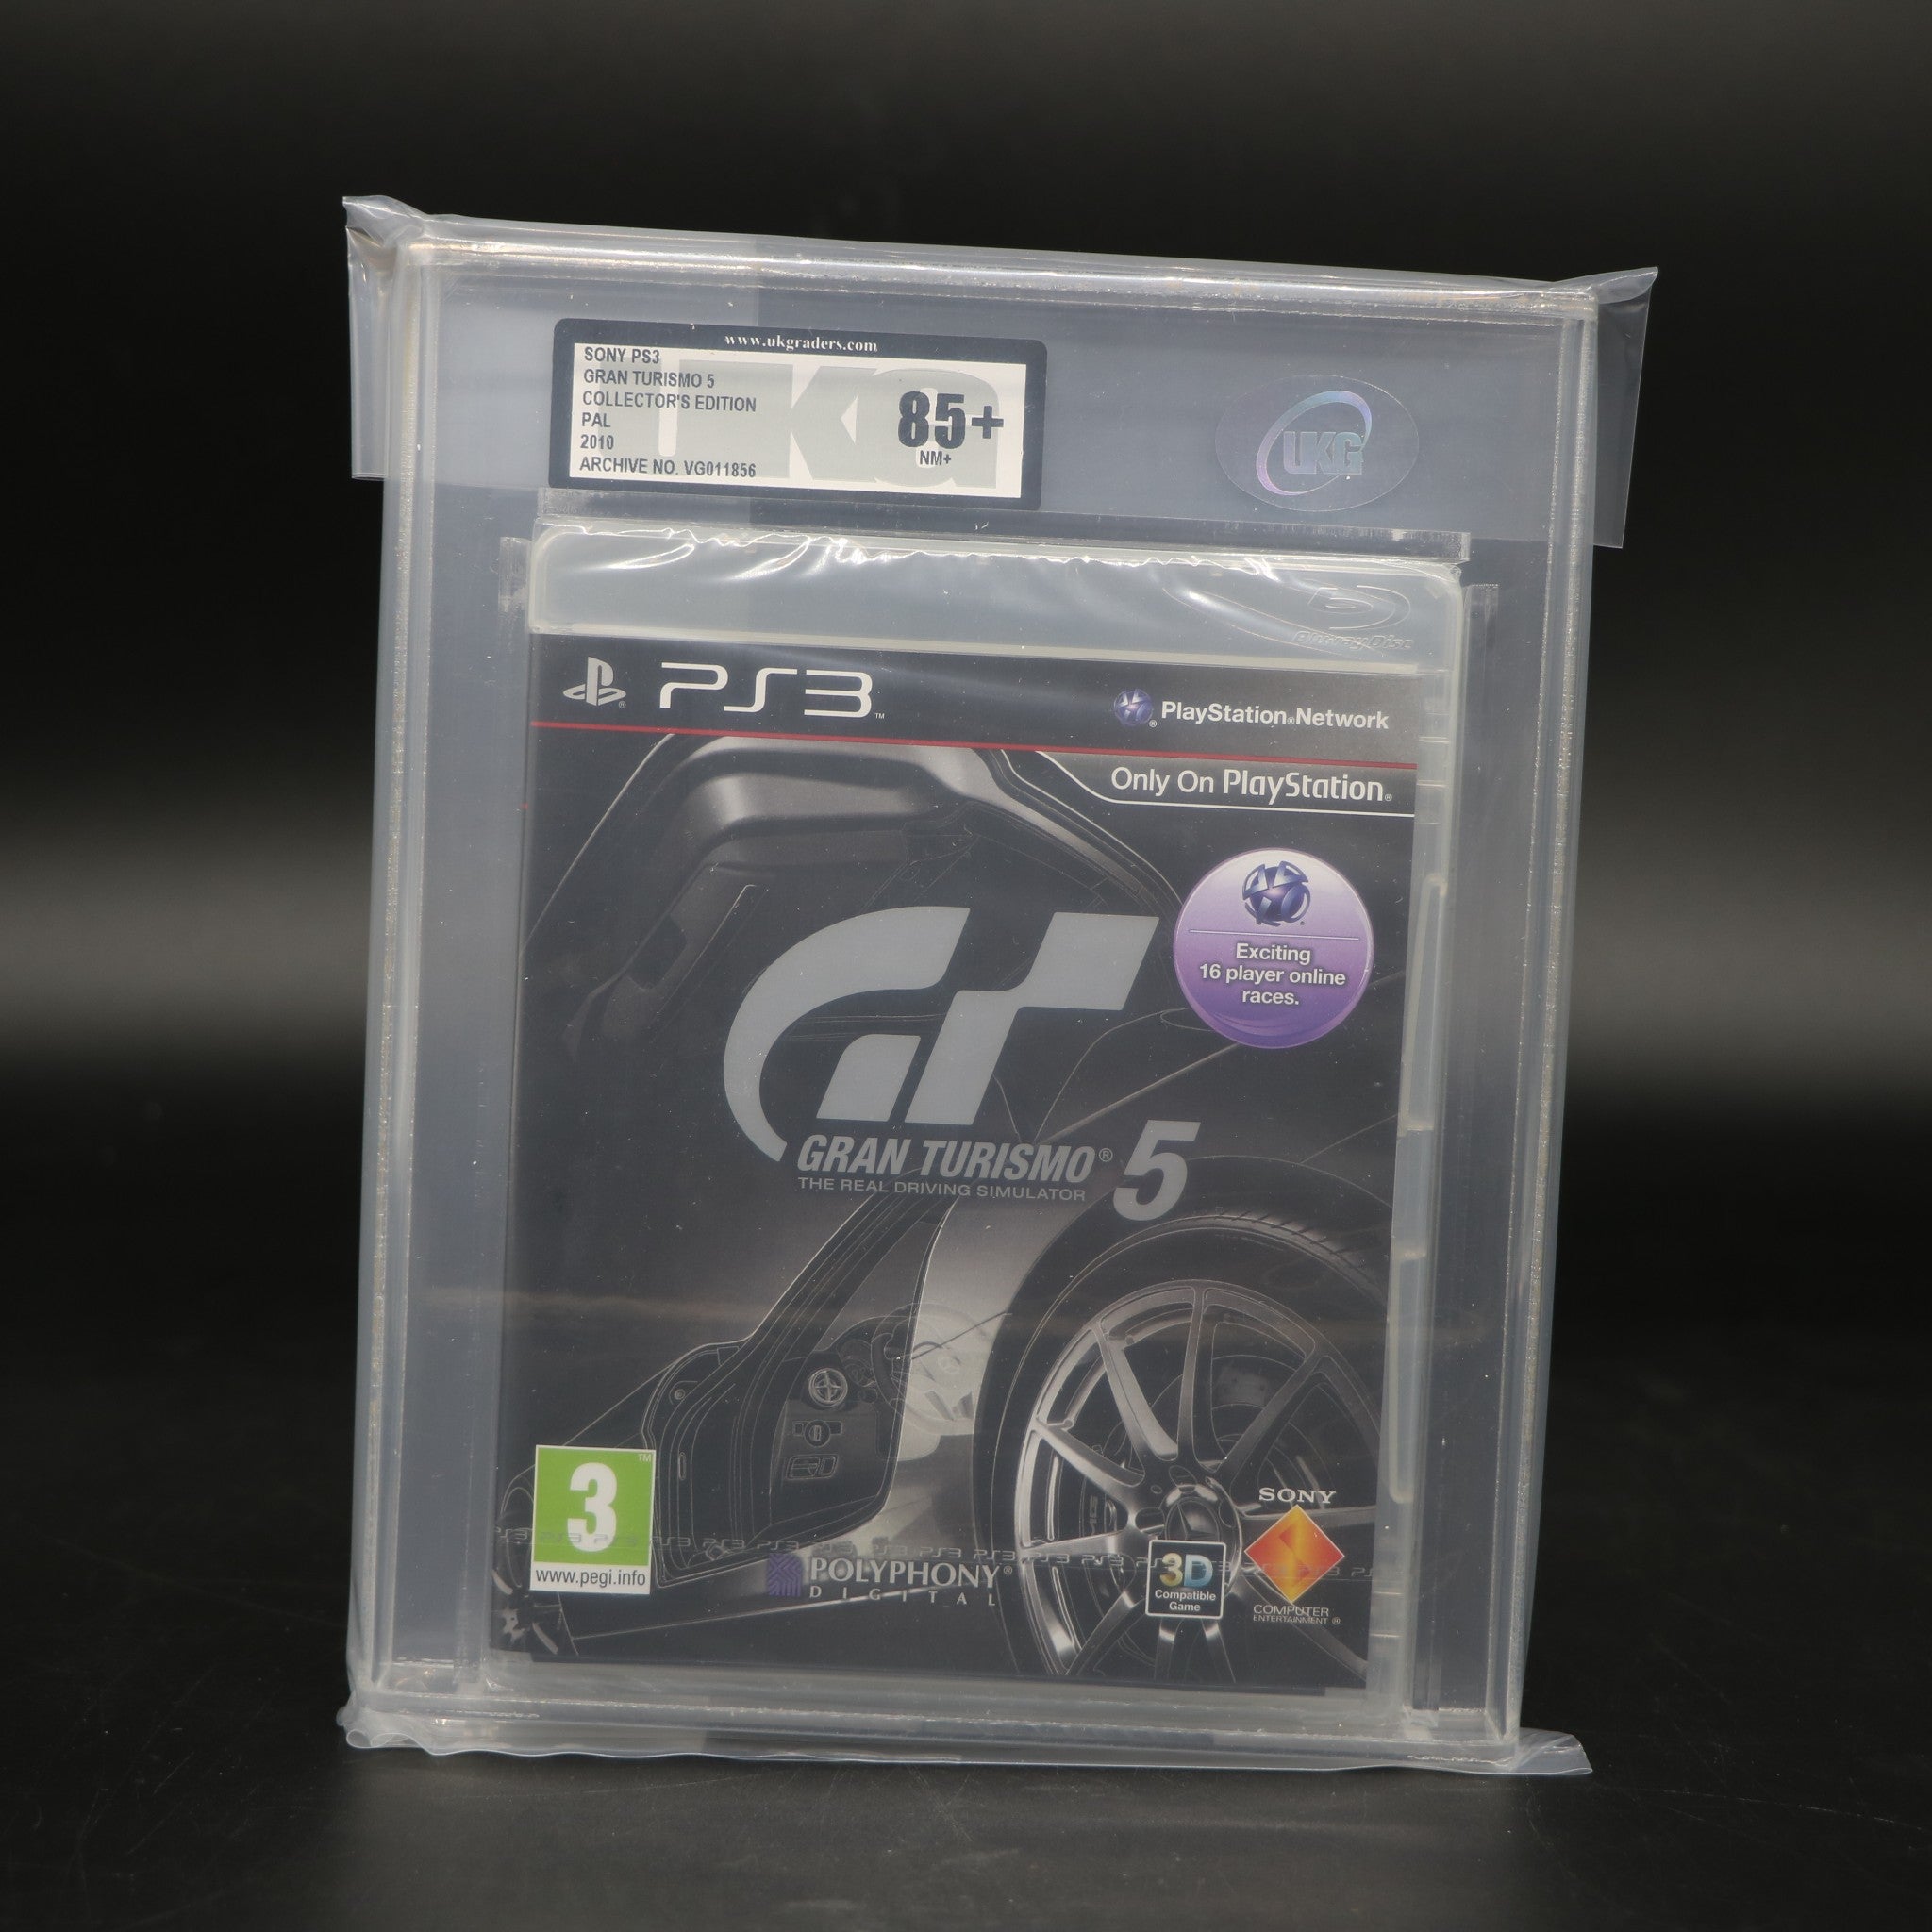 Gran Turismo 5 (GT5) | Collectors Edition | Sony PS3 Game | UKG Graded 85+ NM